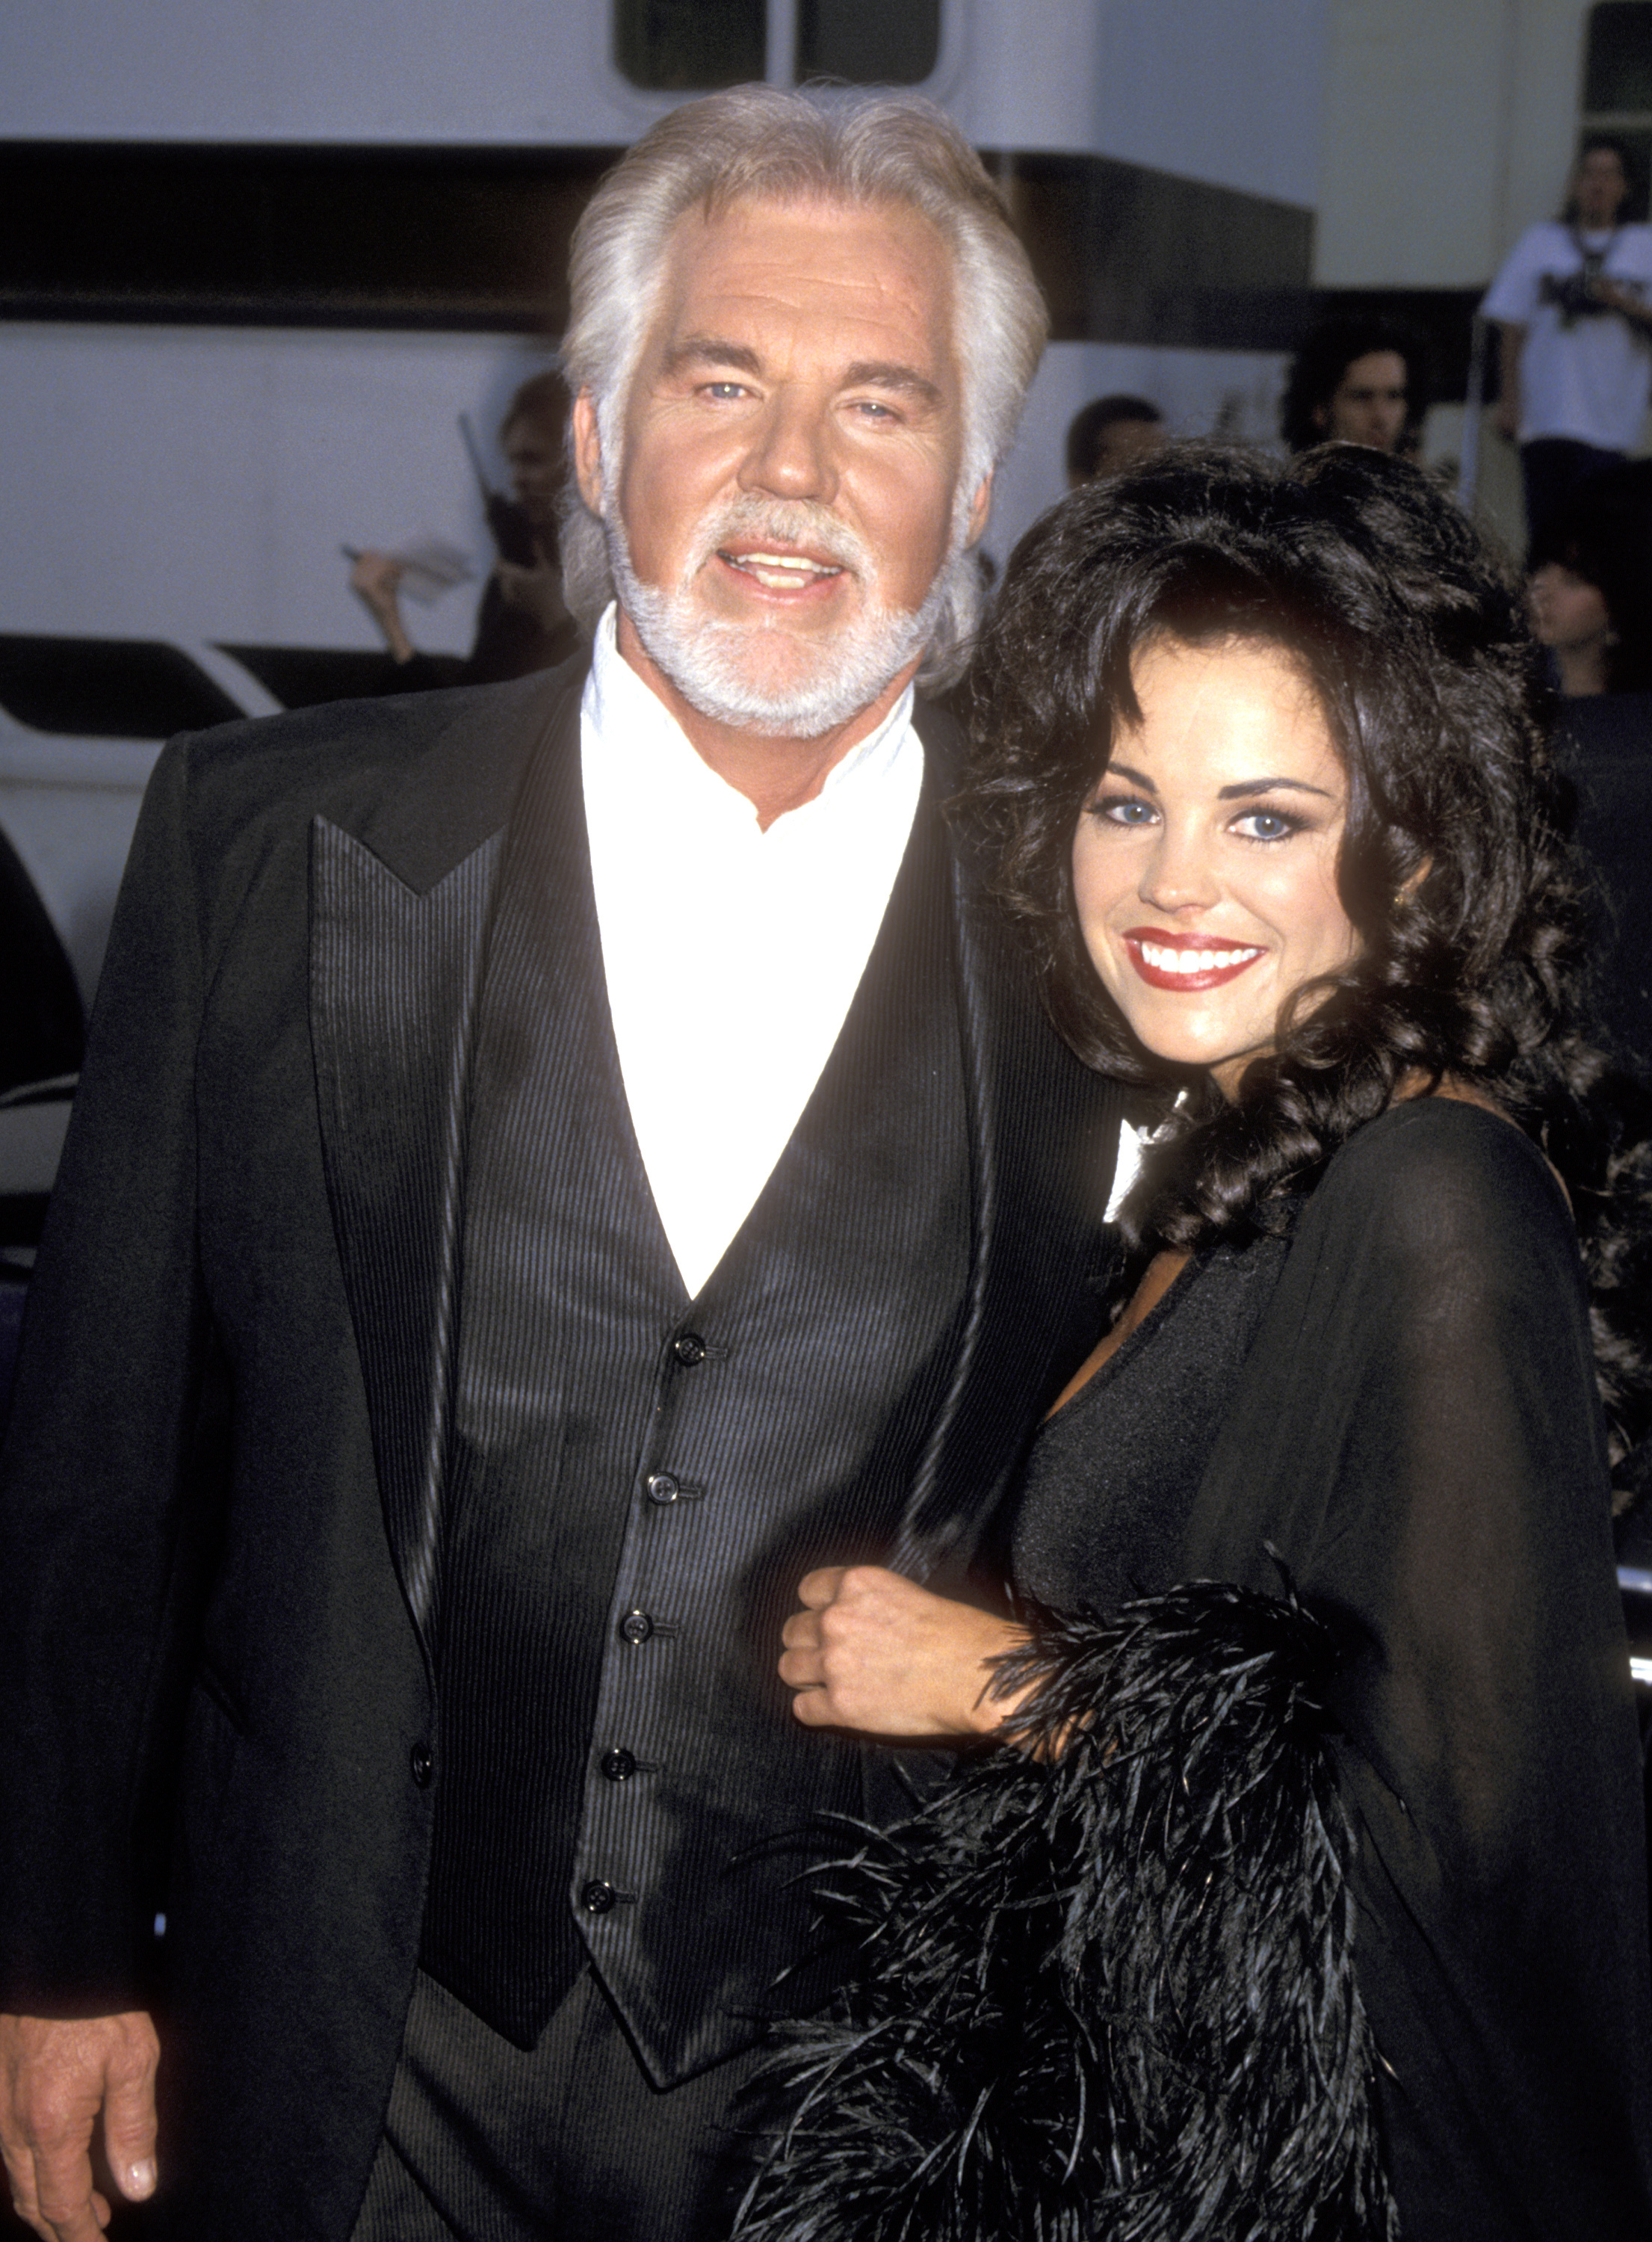 Kenny Rogers and his wife, Wanda Miller, at the 22nd Annual American Music Awards on January 30, 1995 | Source: Getty Images